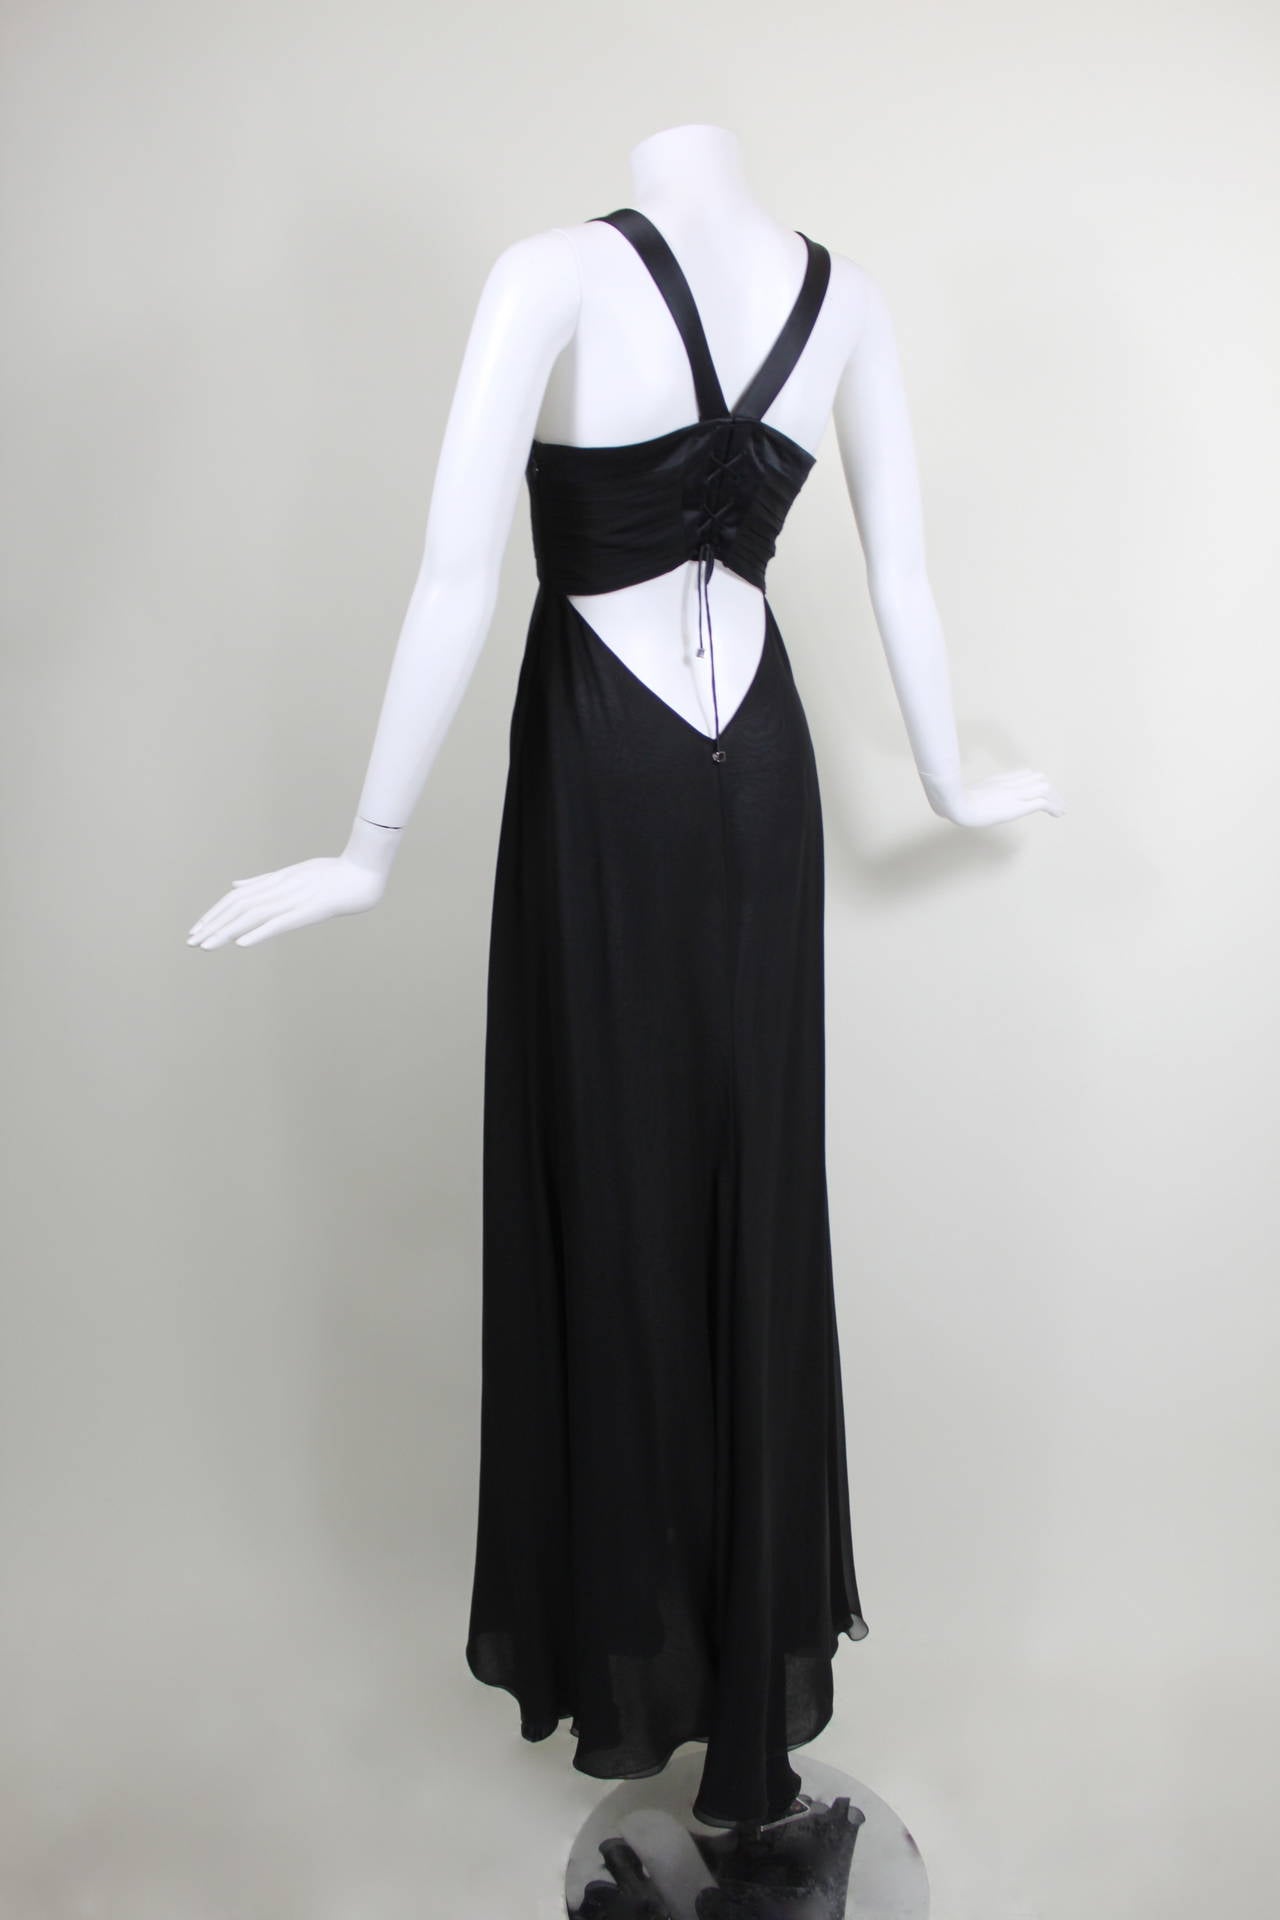 Versace Black Satin and Chiffon Evening Gown 4